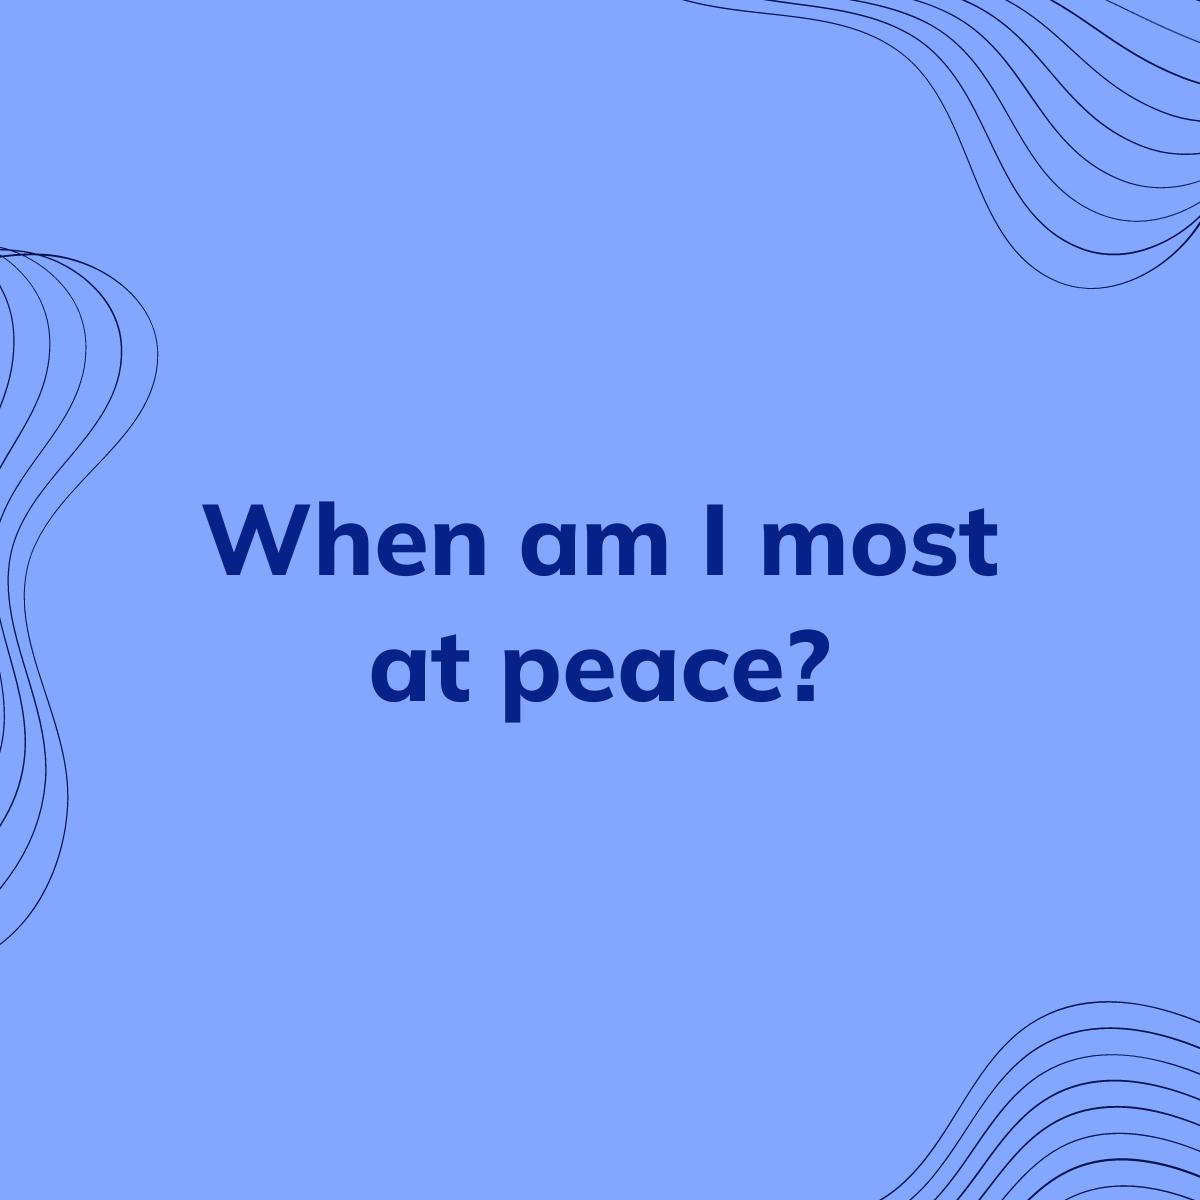 Journal Prompt: When am I most at peace?